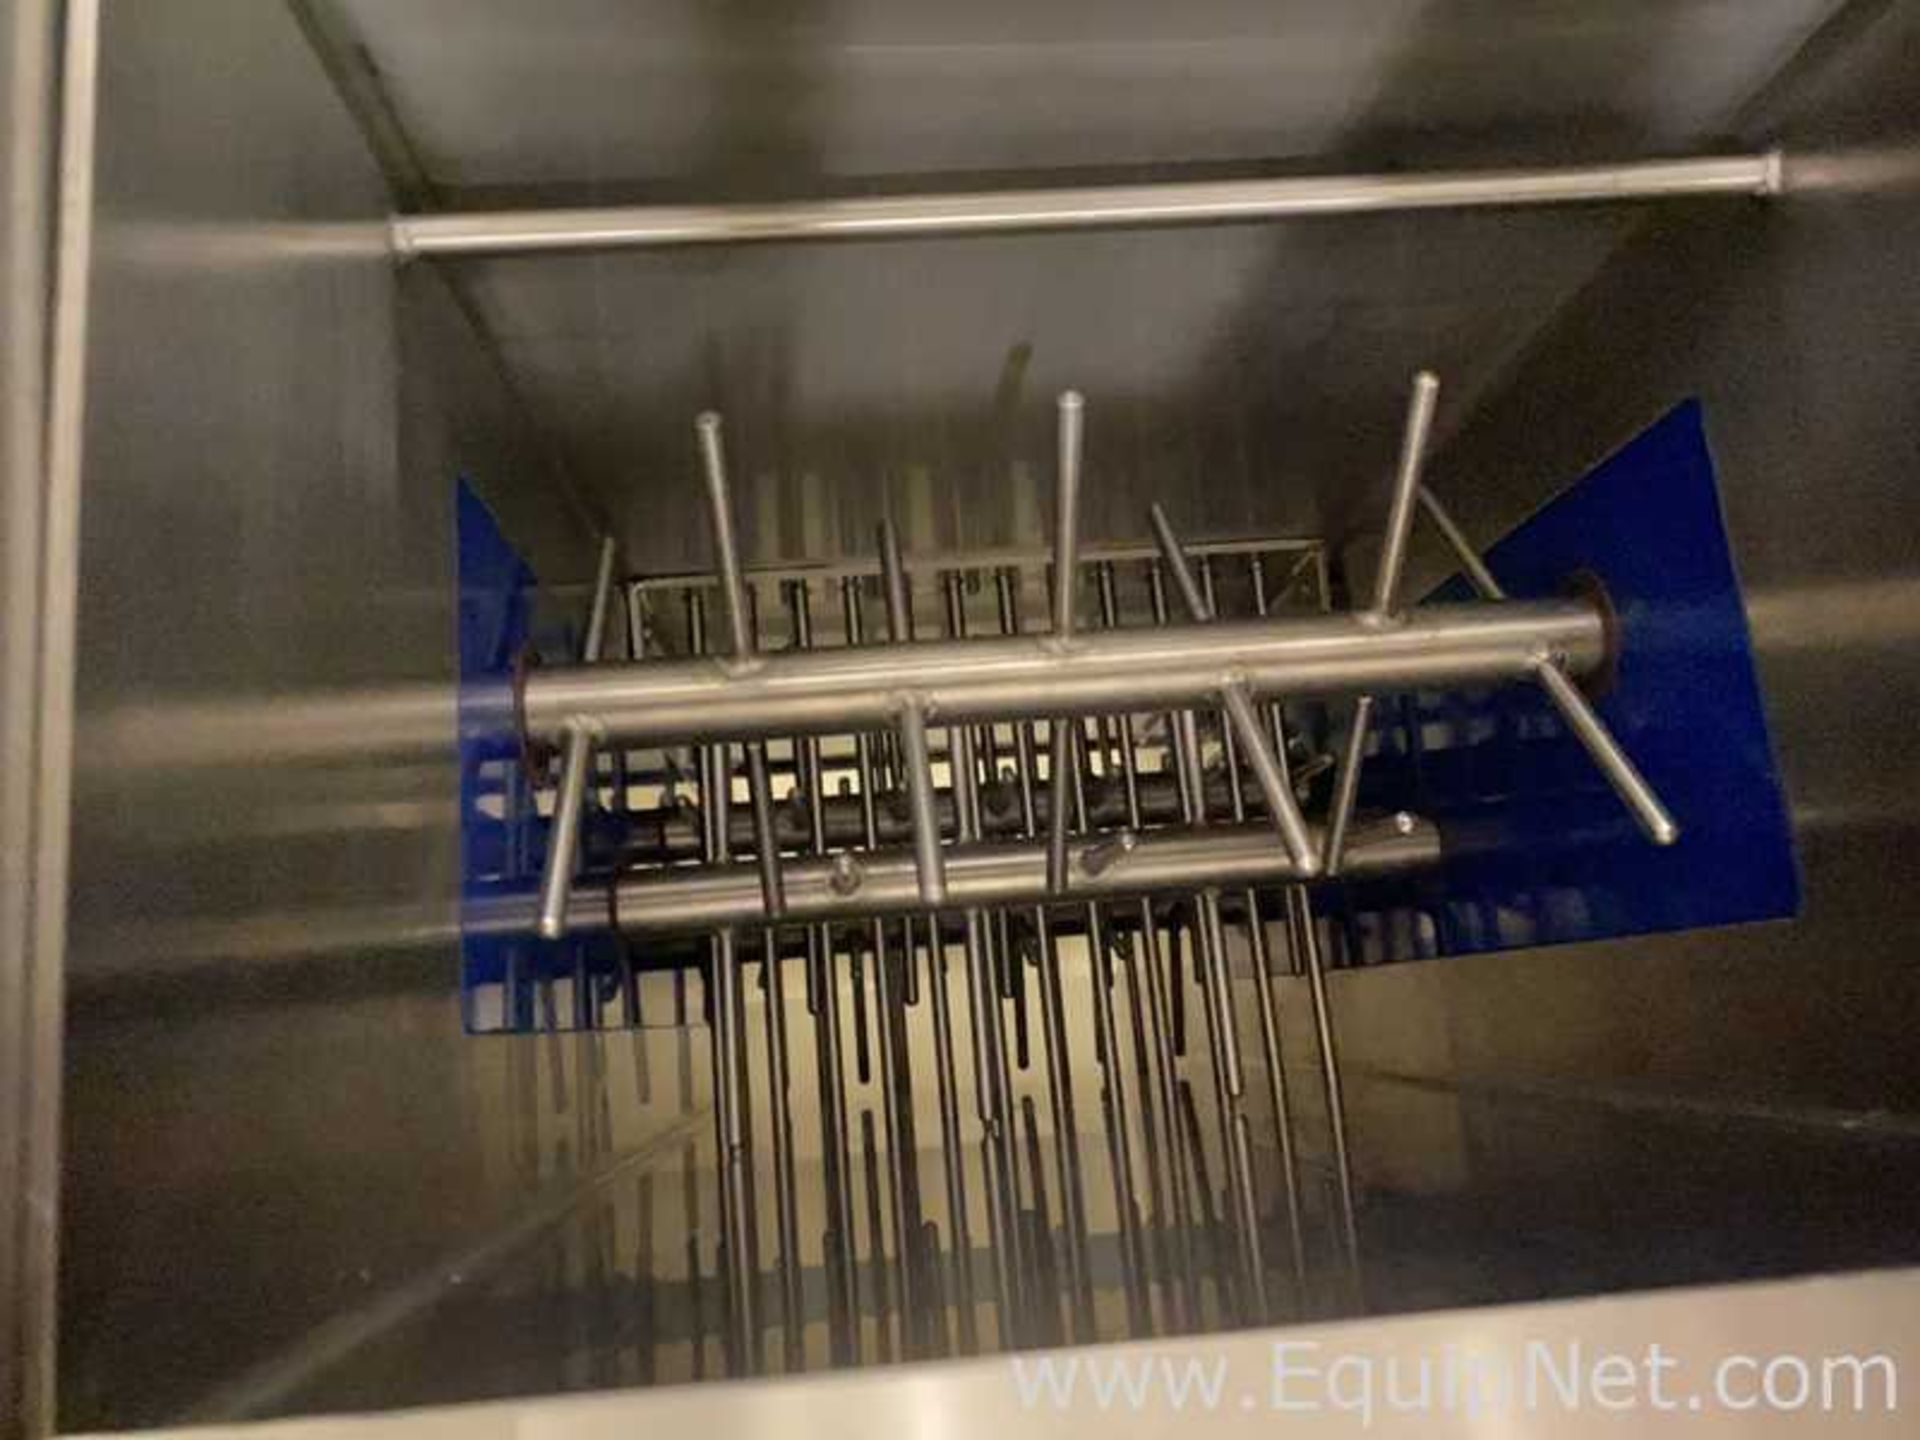 CM Machine Services Meat Shredding Machine With Flighted Incline Conveyor for Shredder - Image 7 of 15